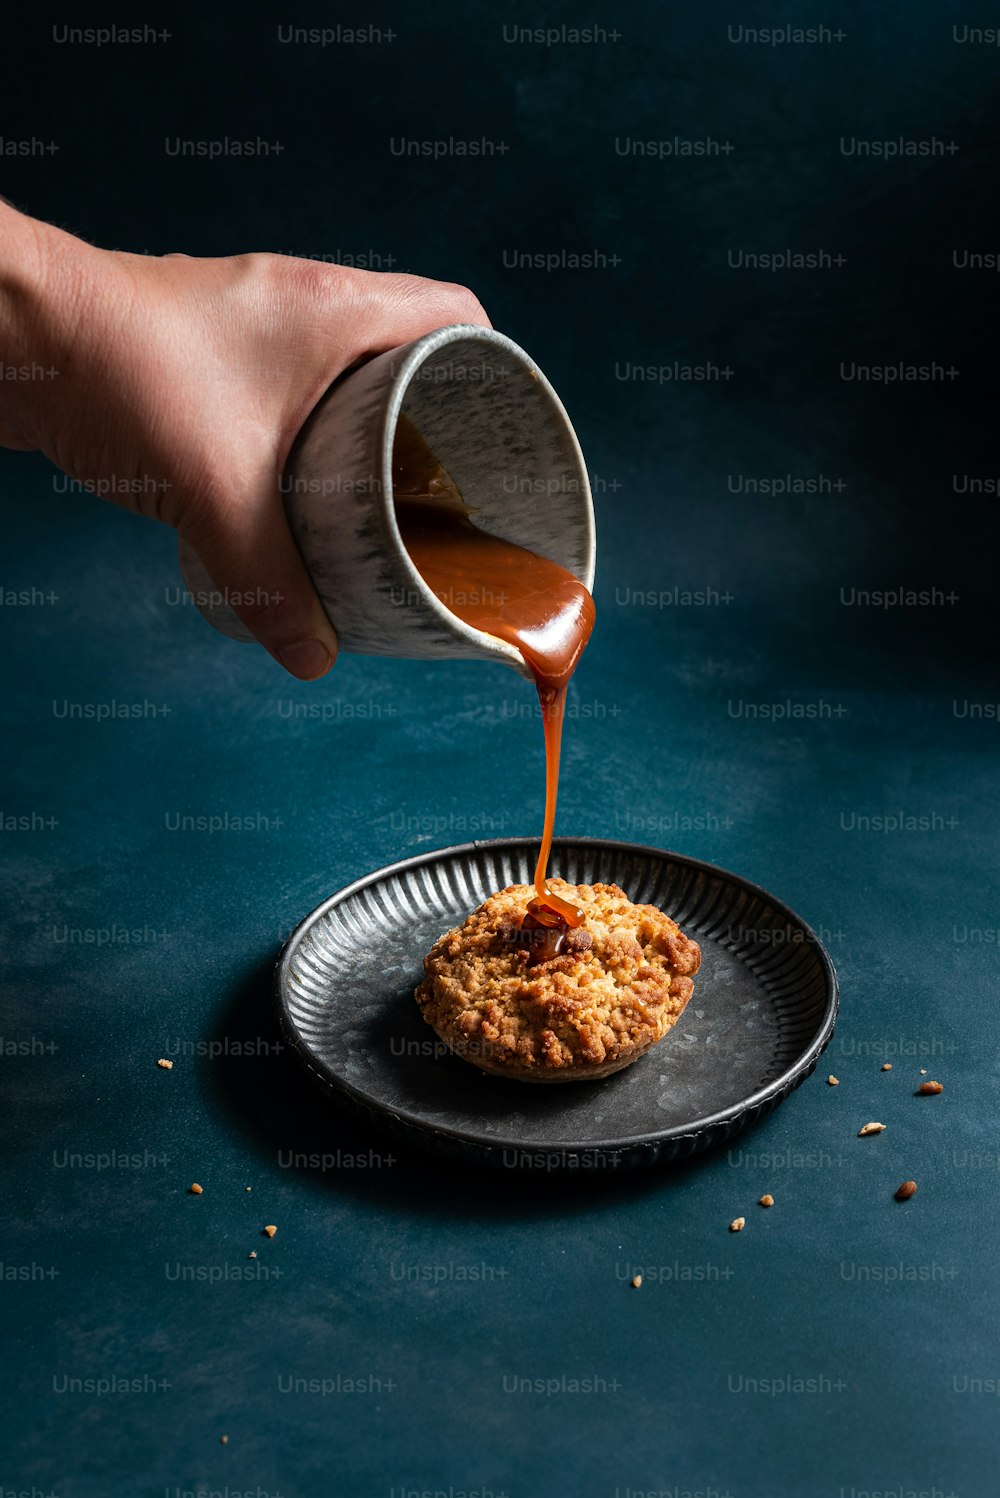 a person pouring sauce on a cookie on a plate